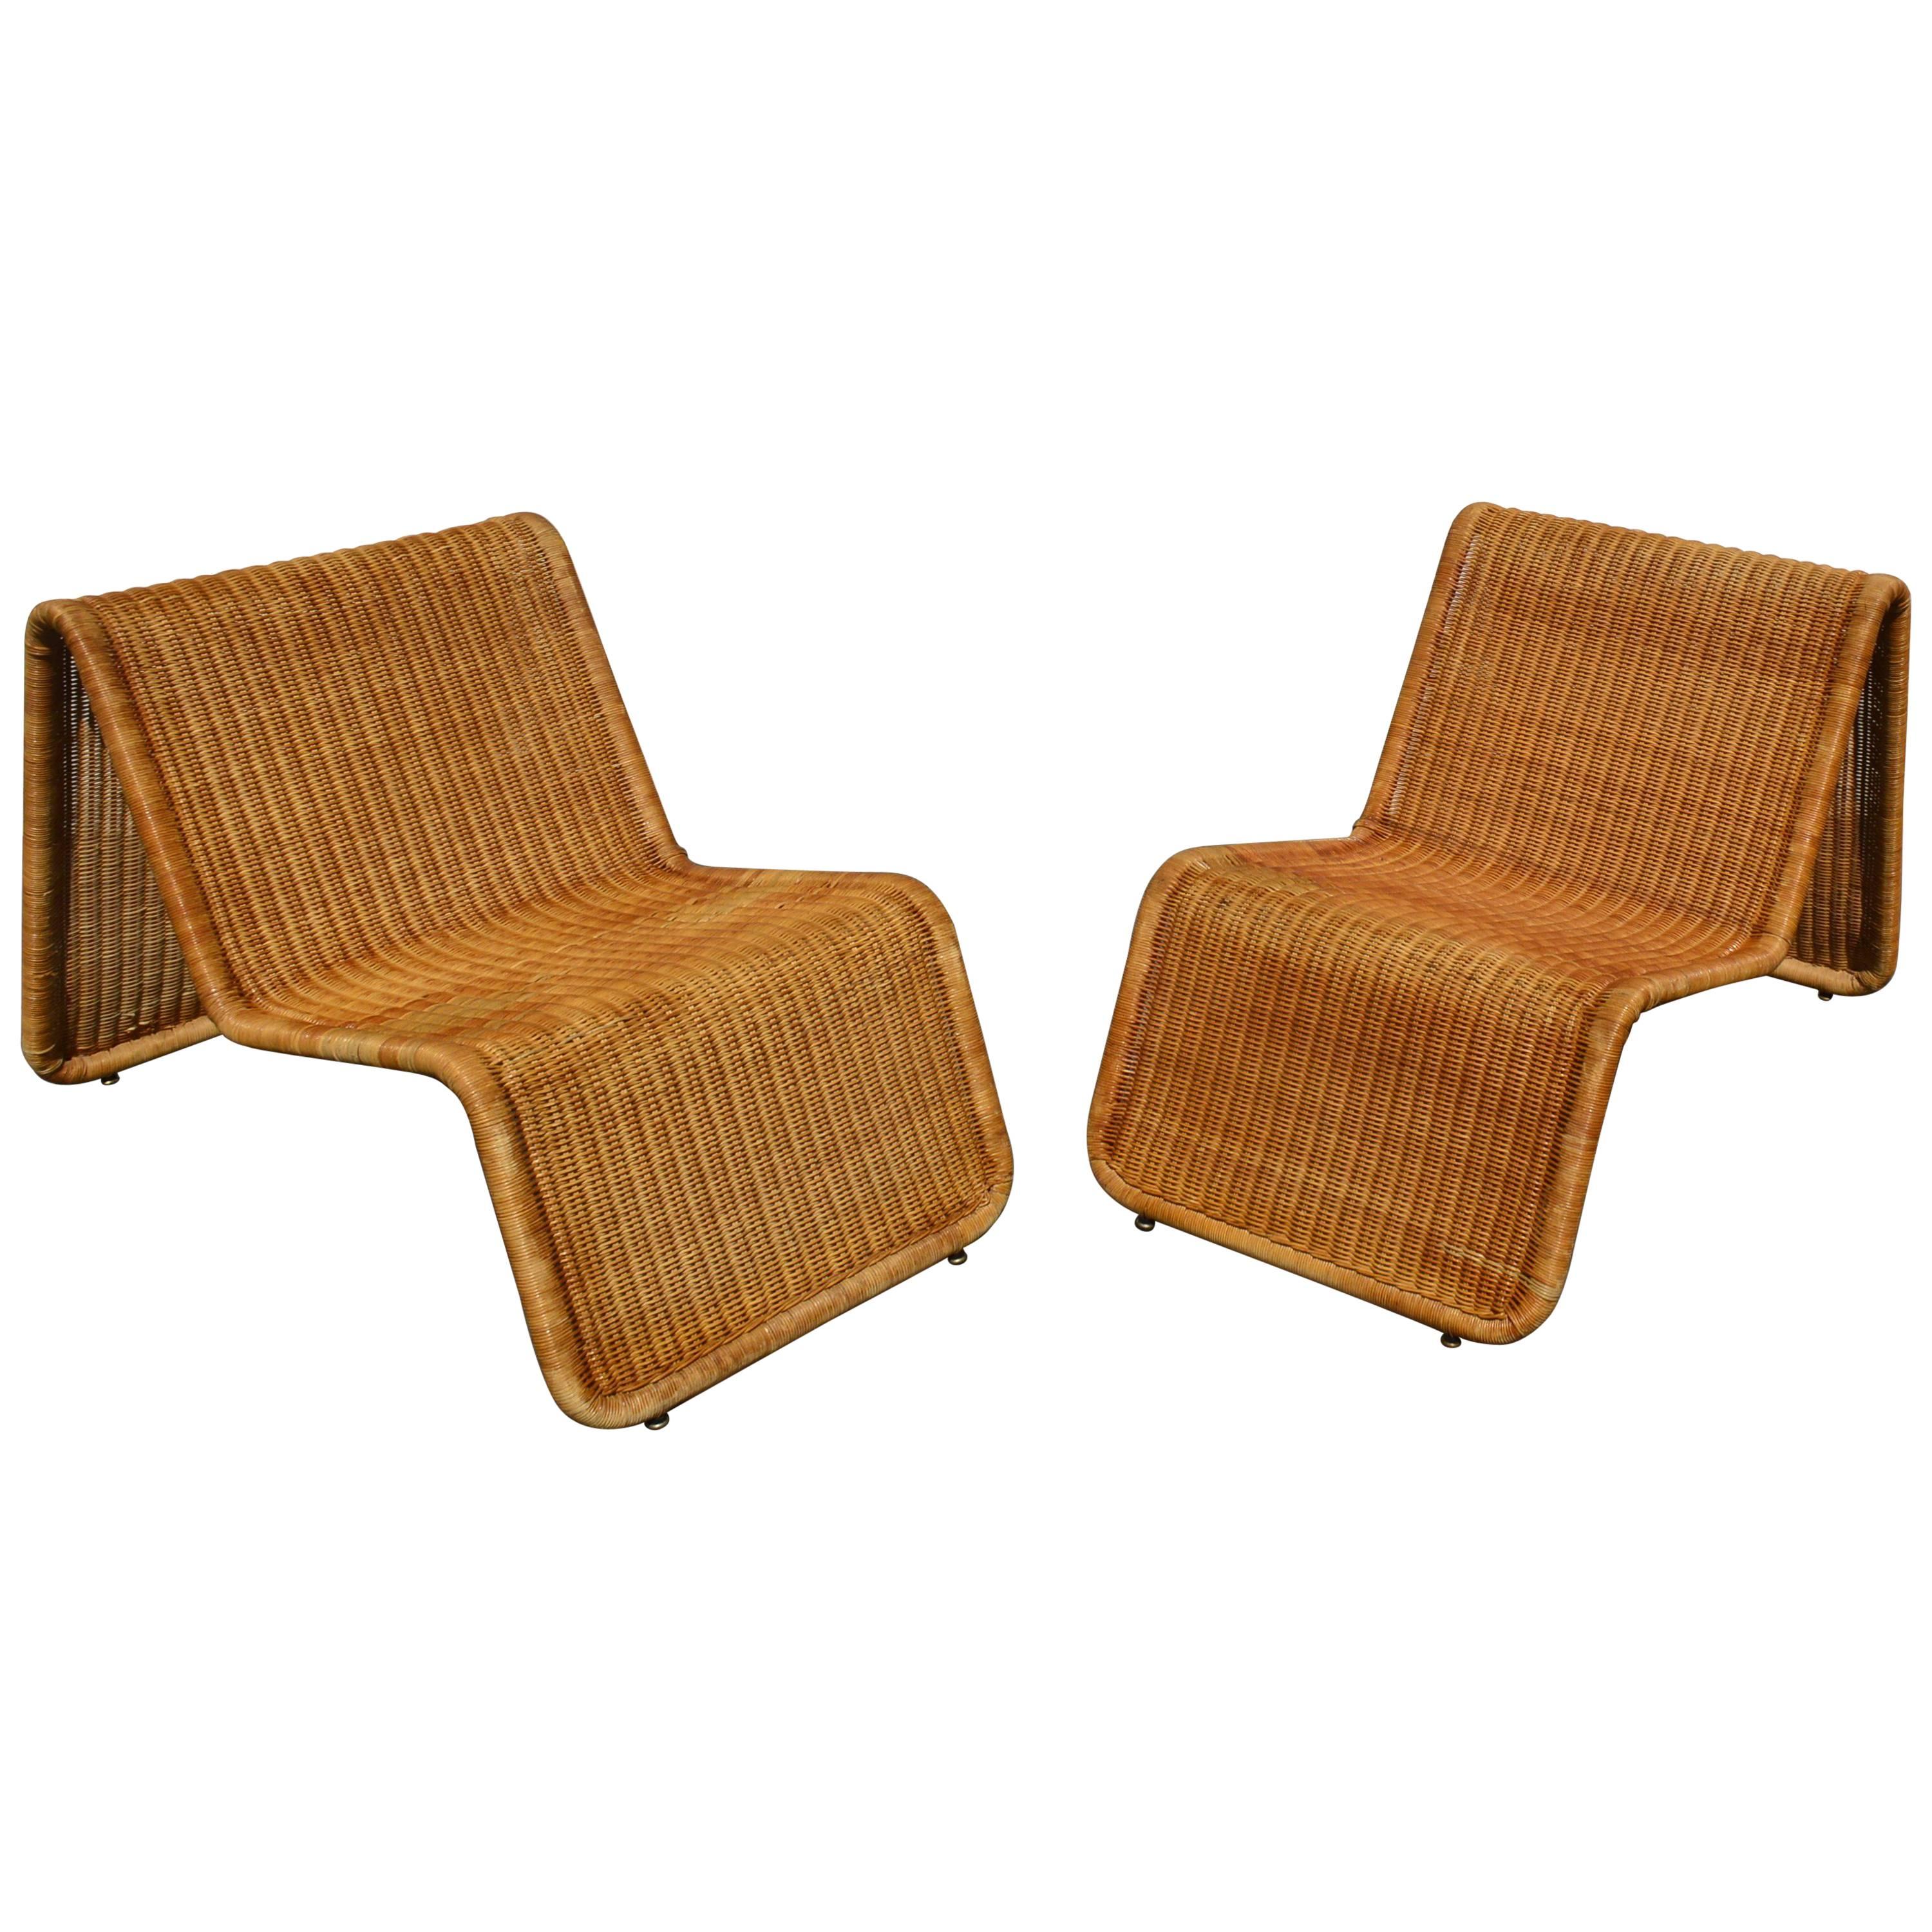 Pair of Wicker Lounge Chairs by Tito Agnoli for Bonacina, Italy, 1960s